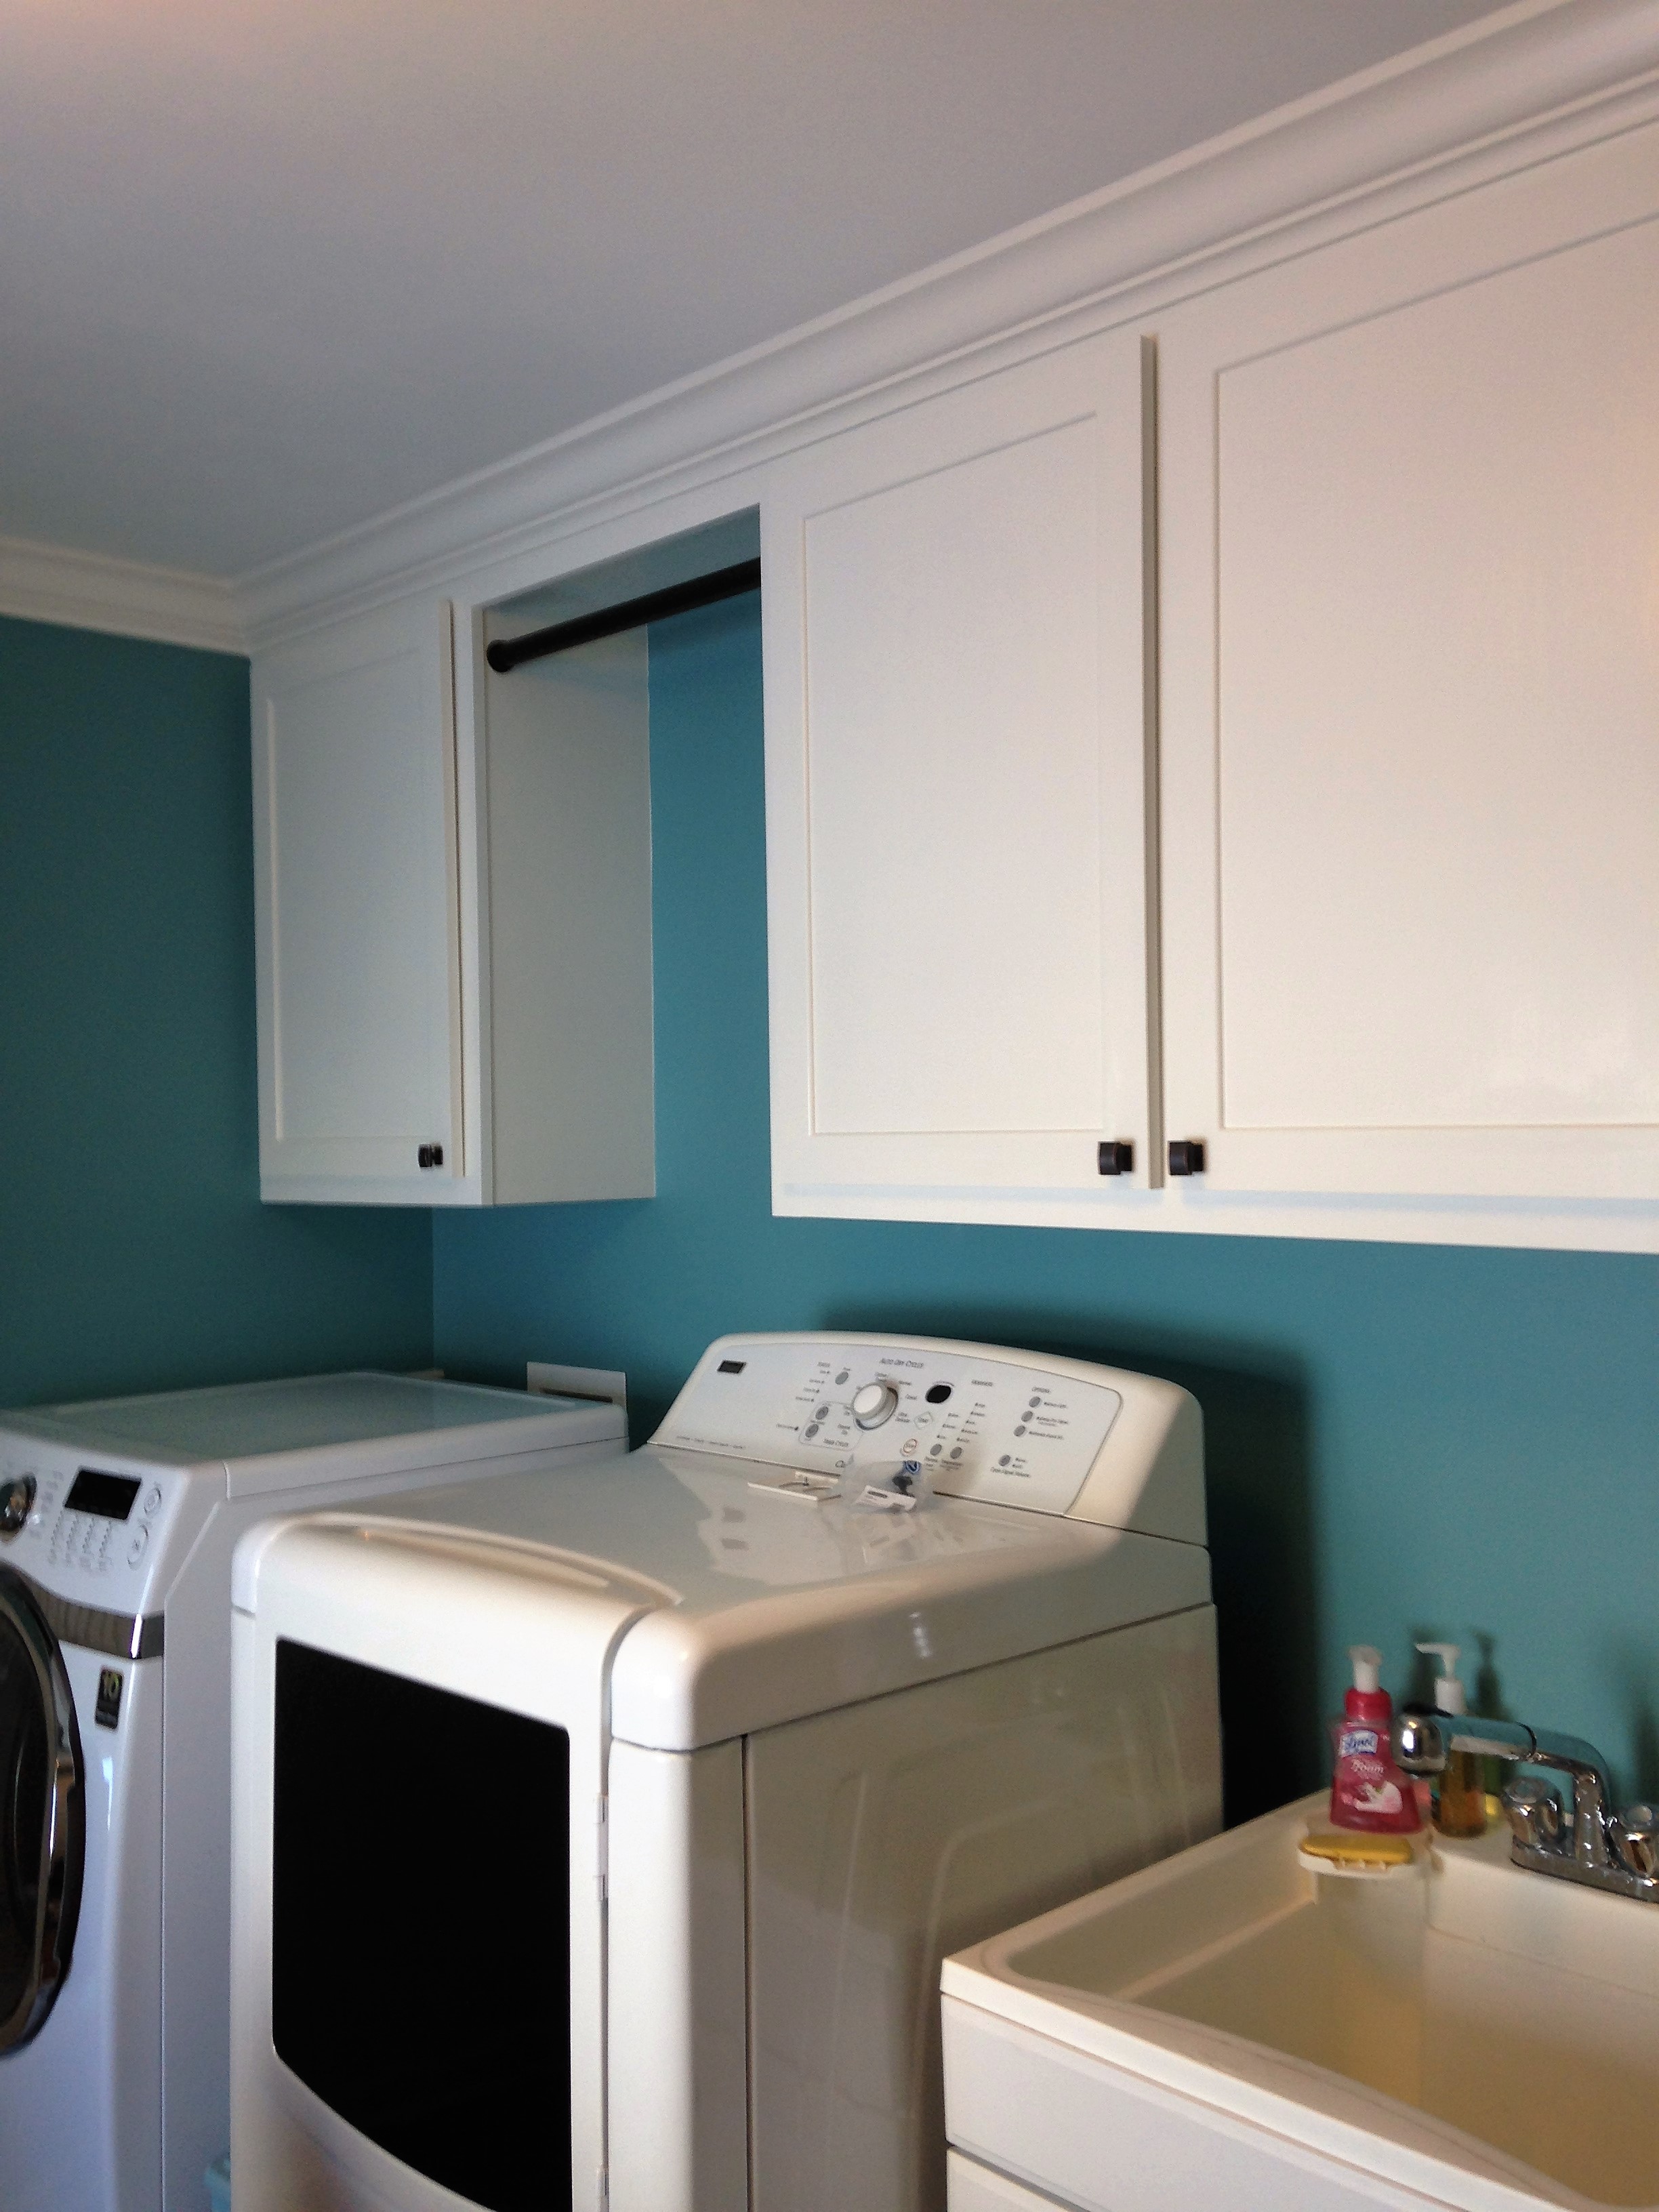 Creating a laundry room.